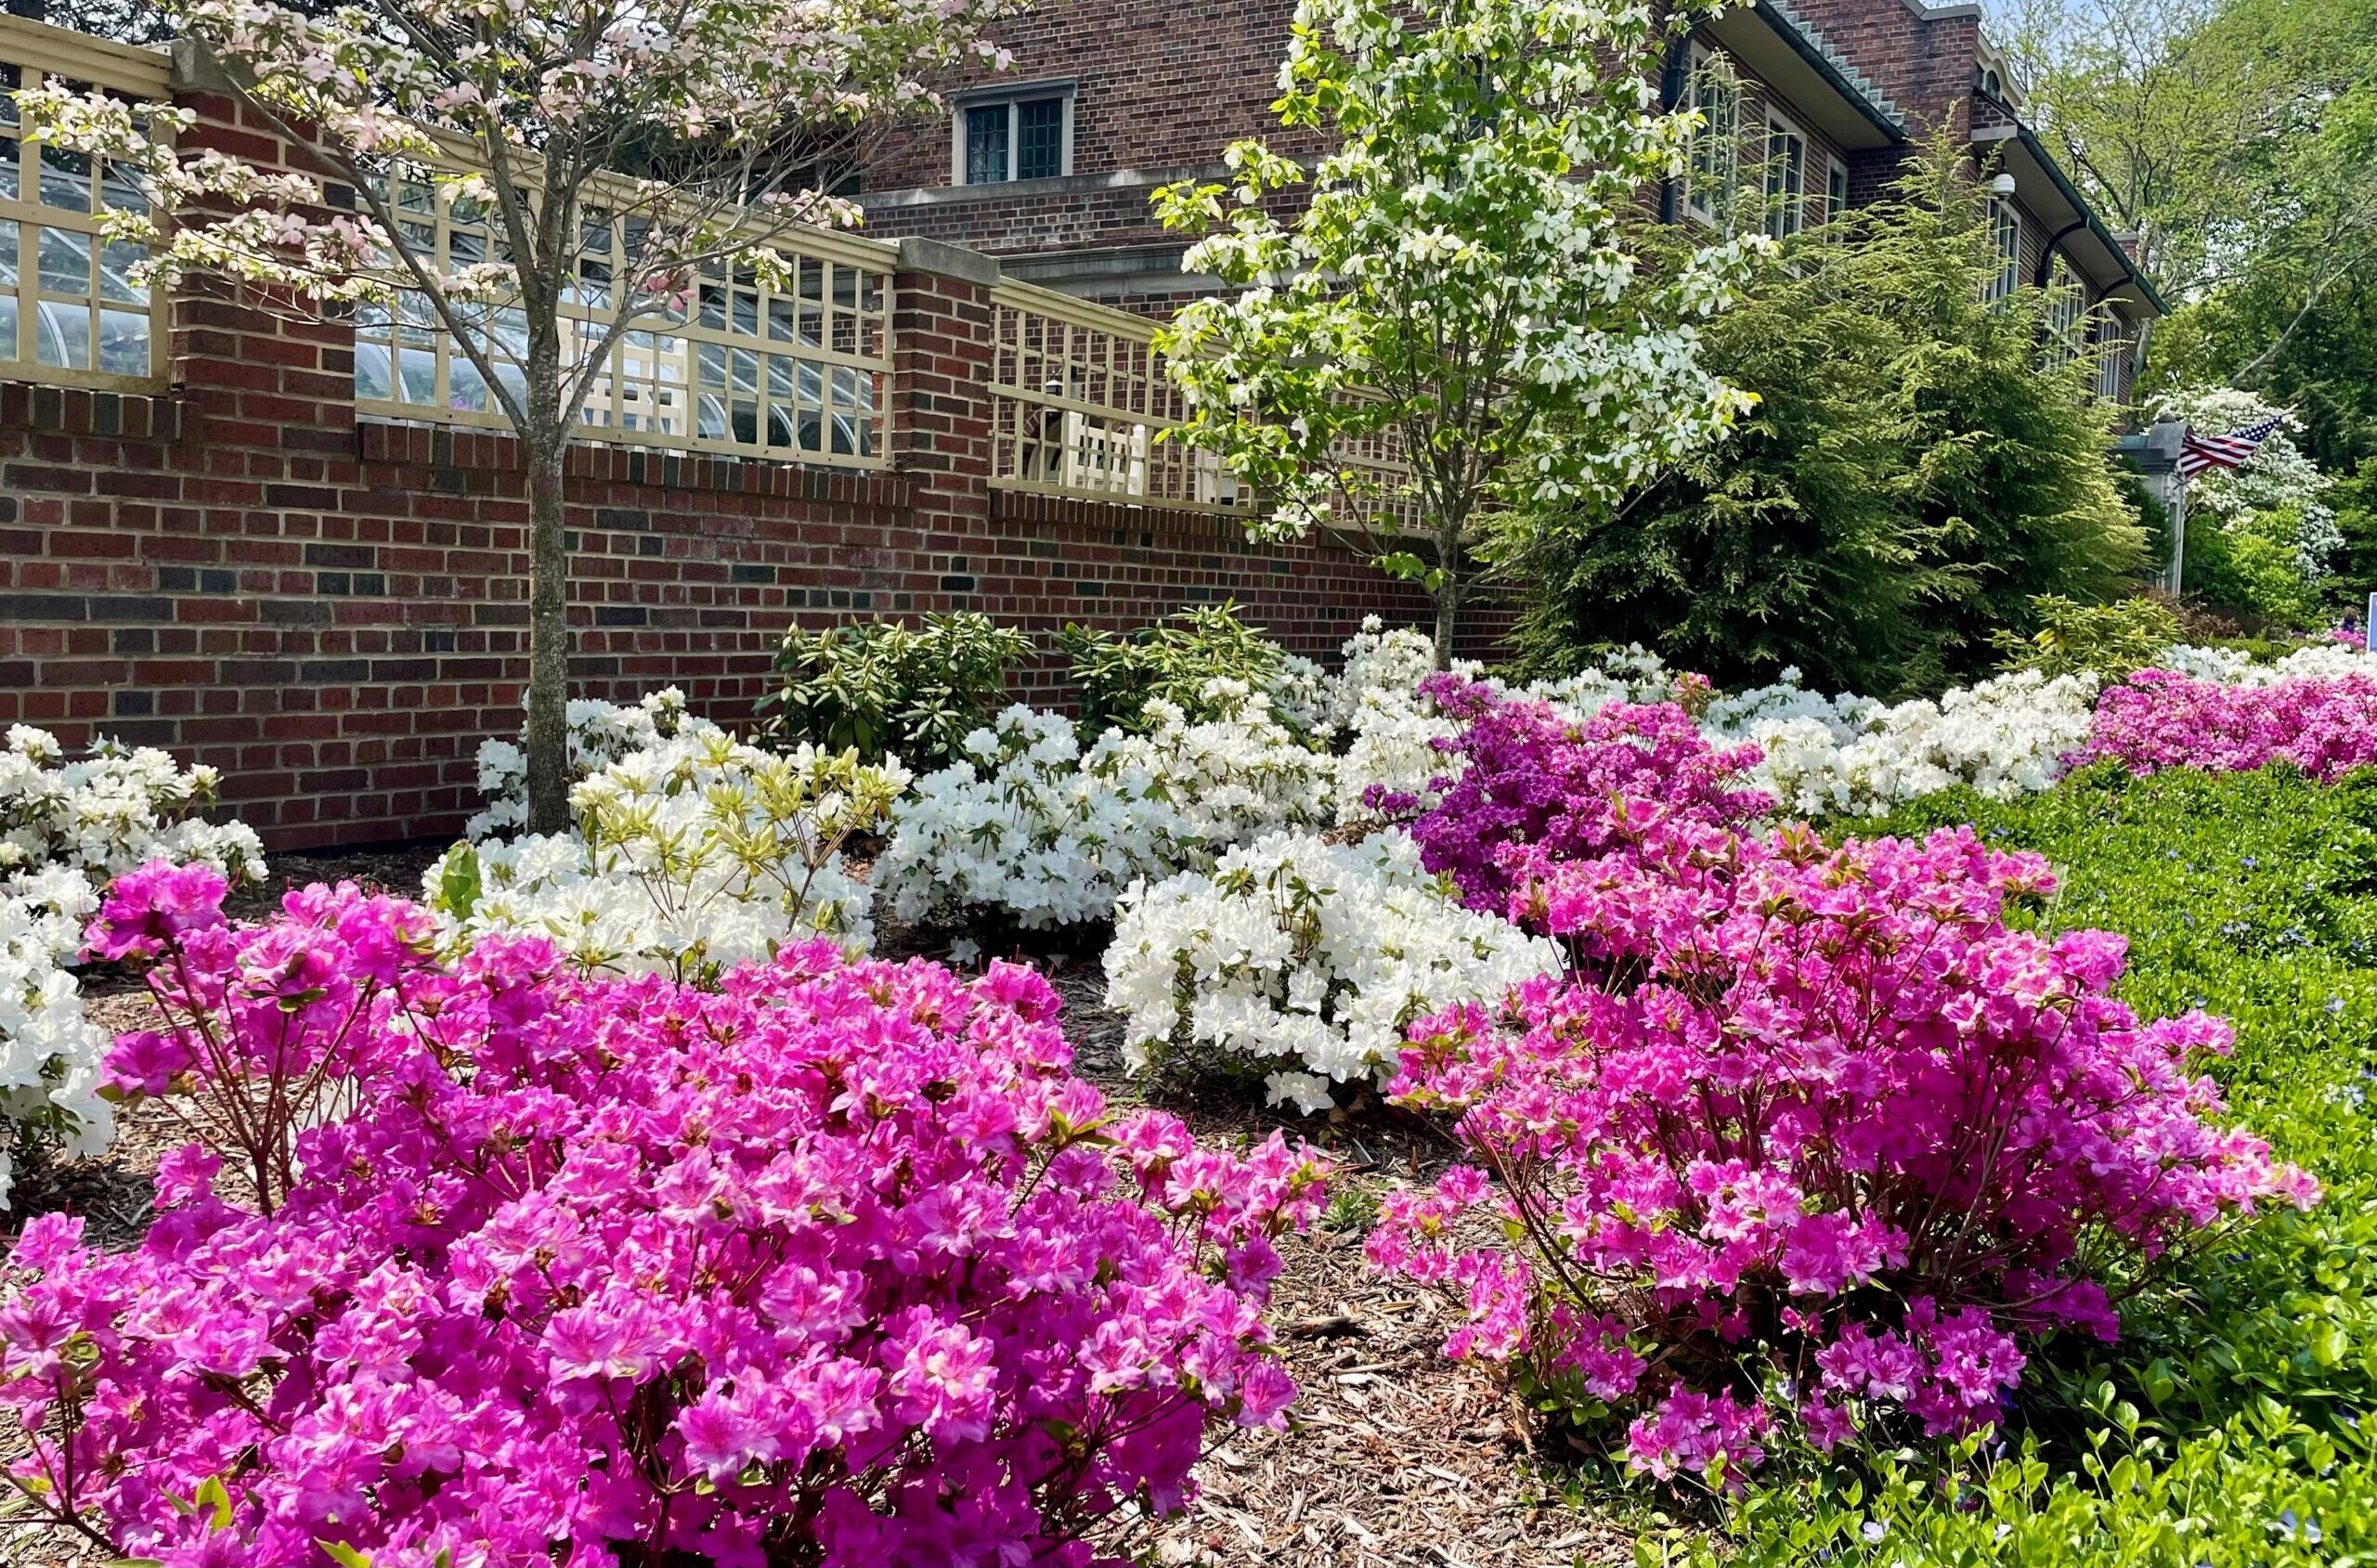 White and bright pink azaleas bloom in front of the historic home.